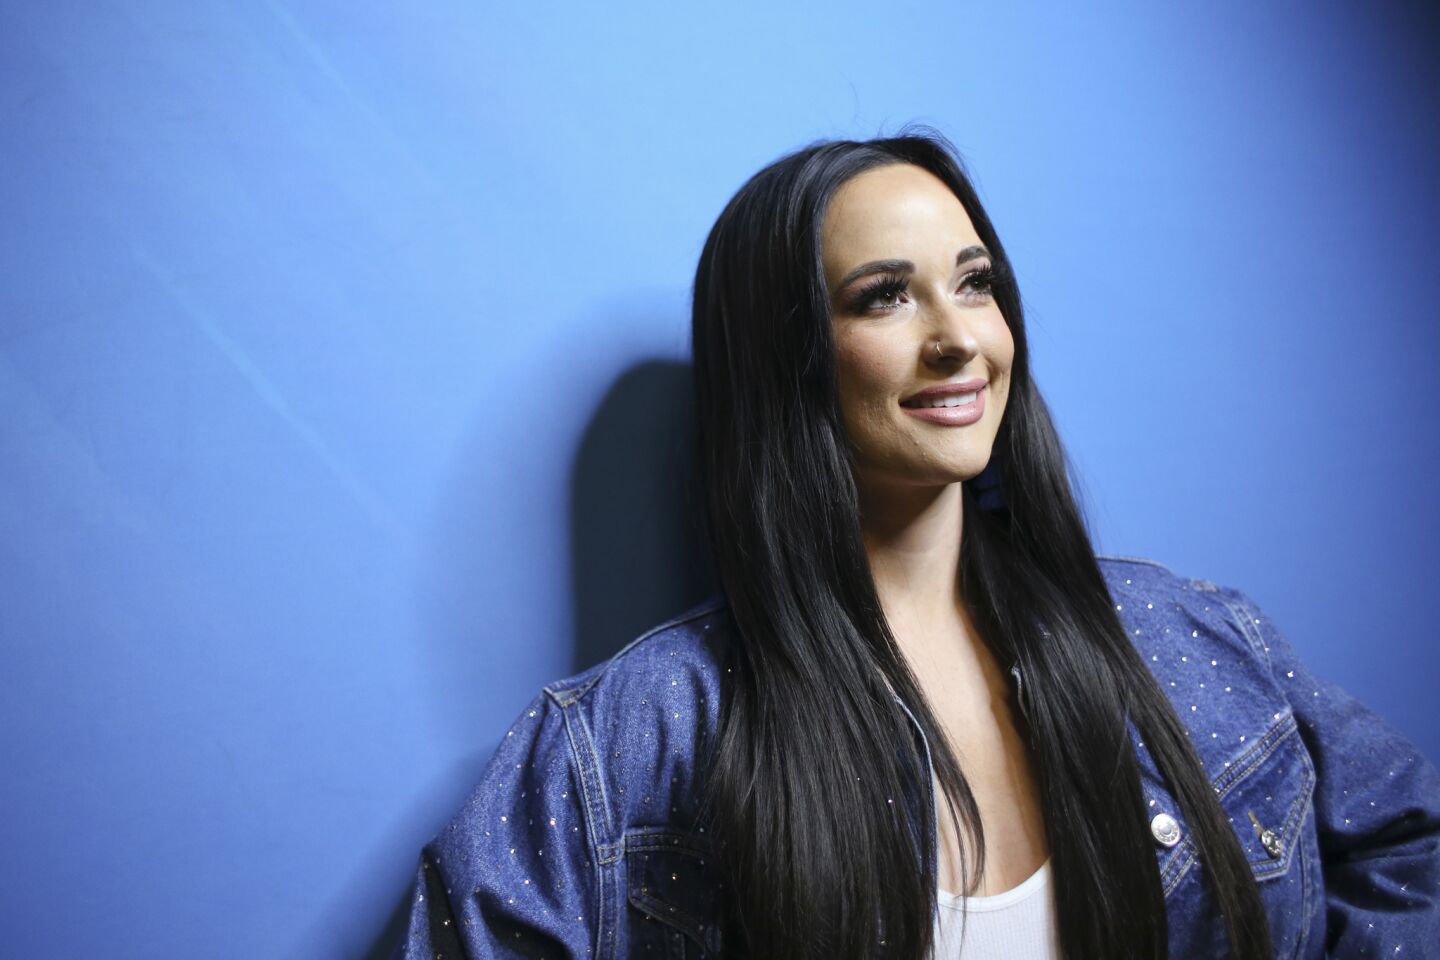 On tour with Kacey Musgraves